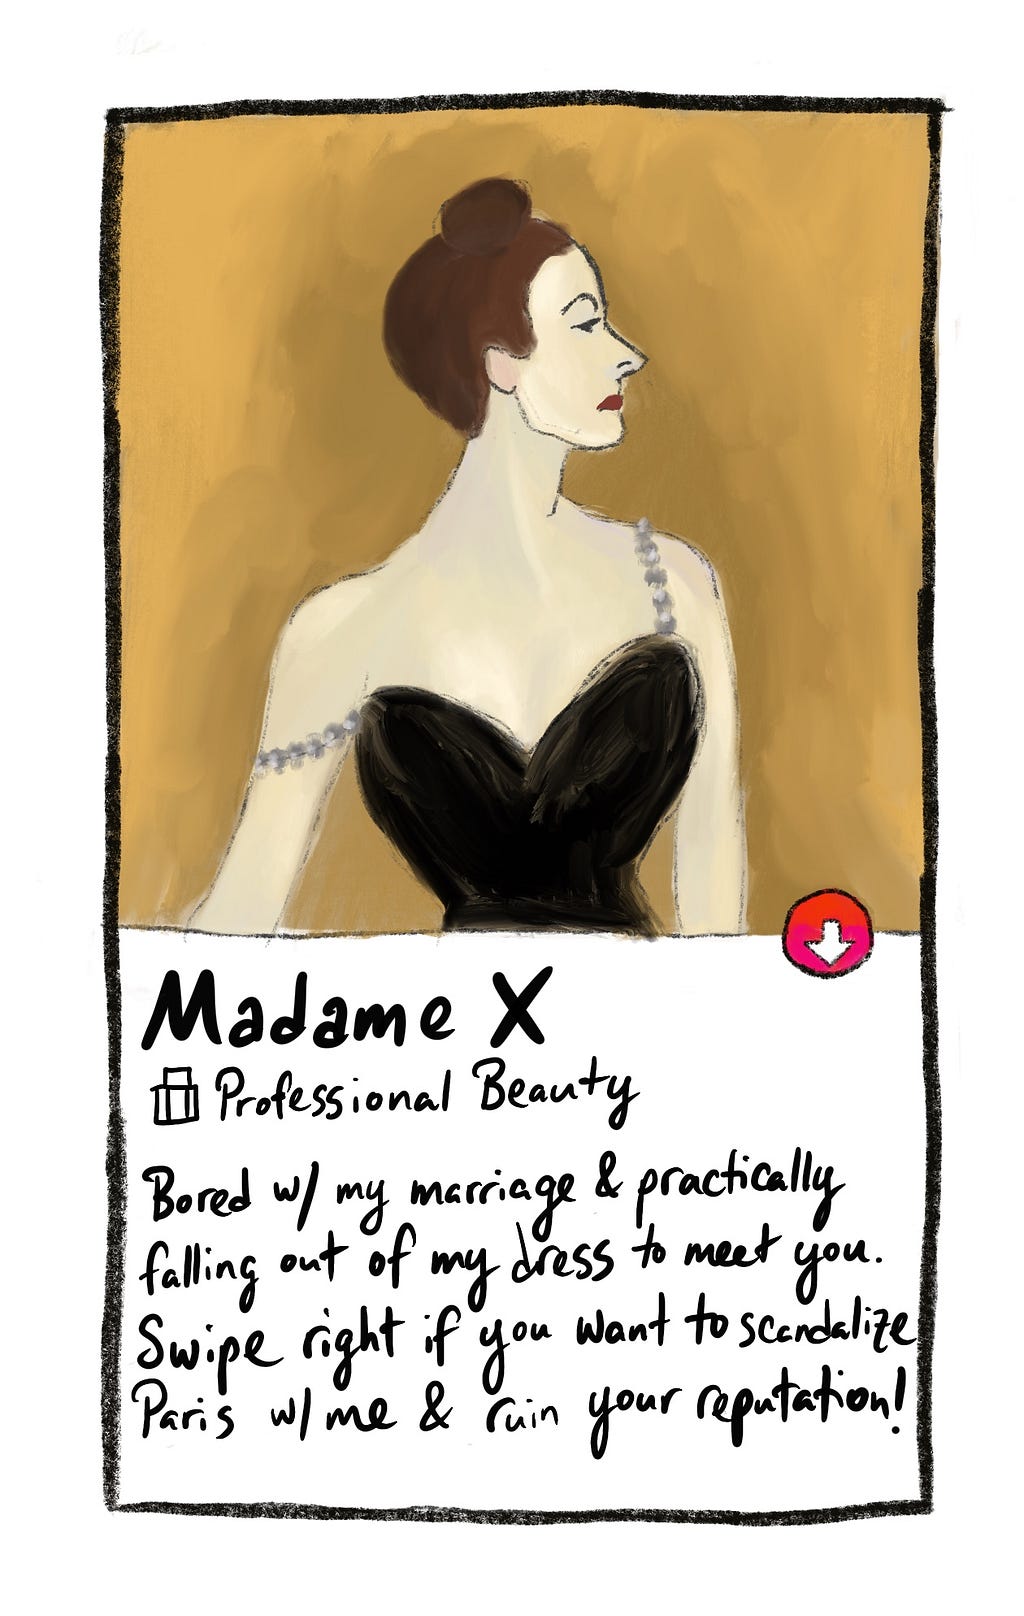 Bored with my marriage & practically falling out of my dress to meet you. — Madame X